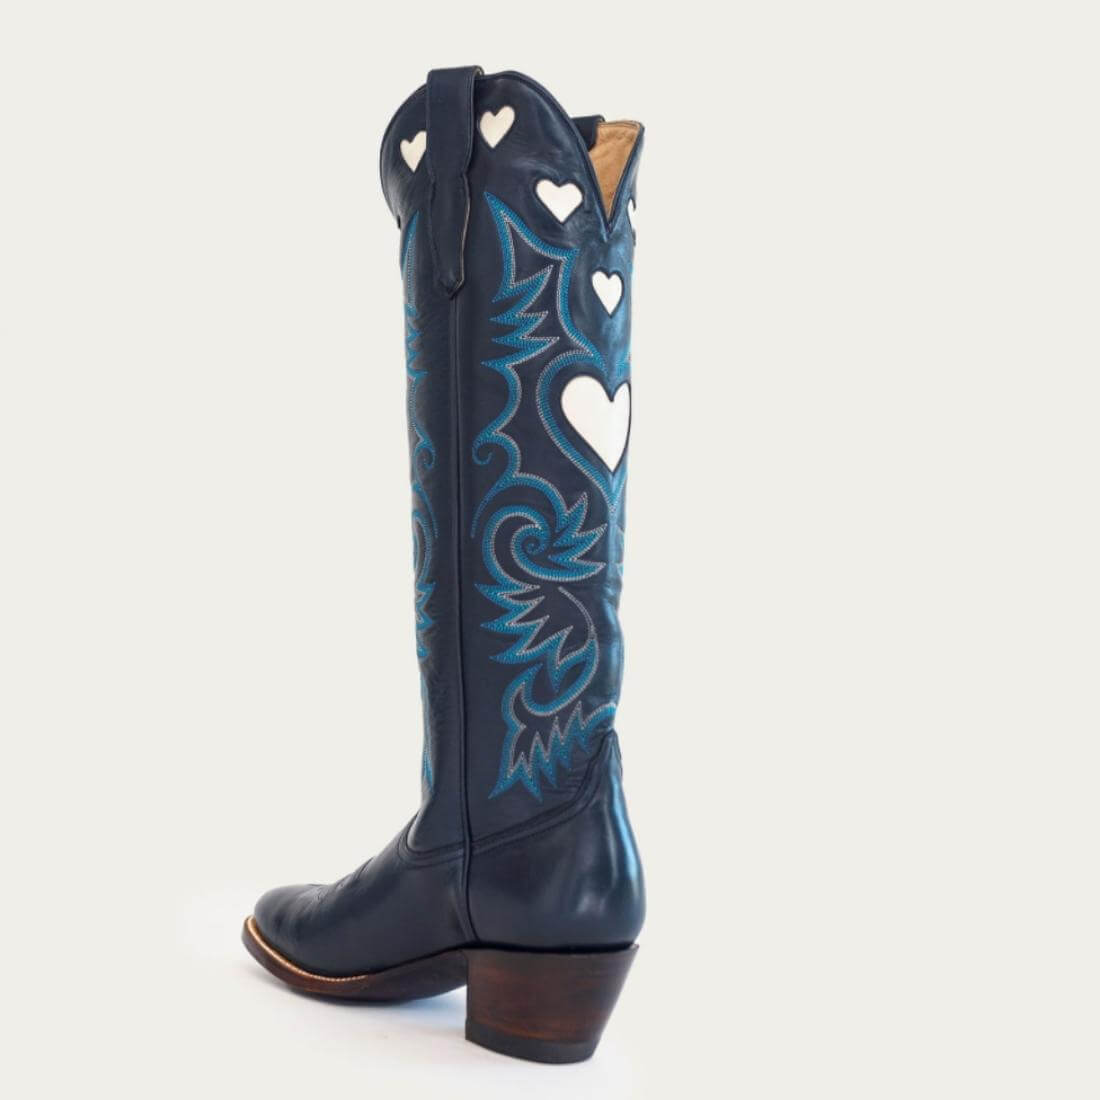 Navy Heart Boot Limited Edition, side profile